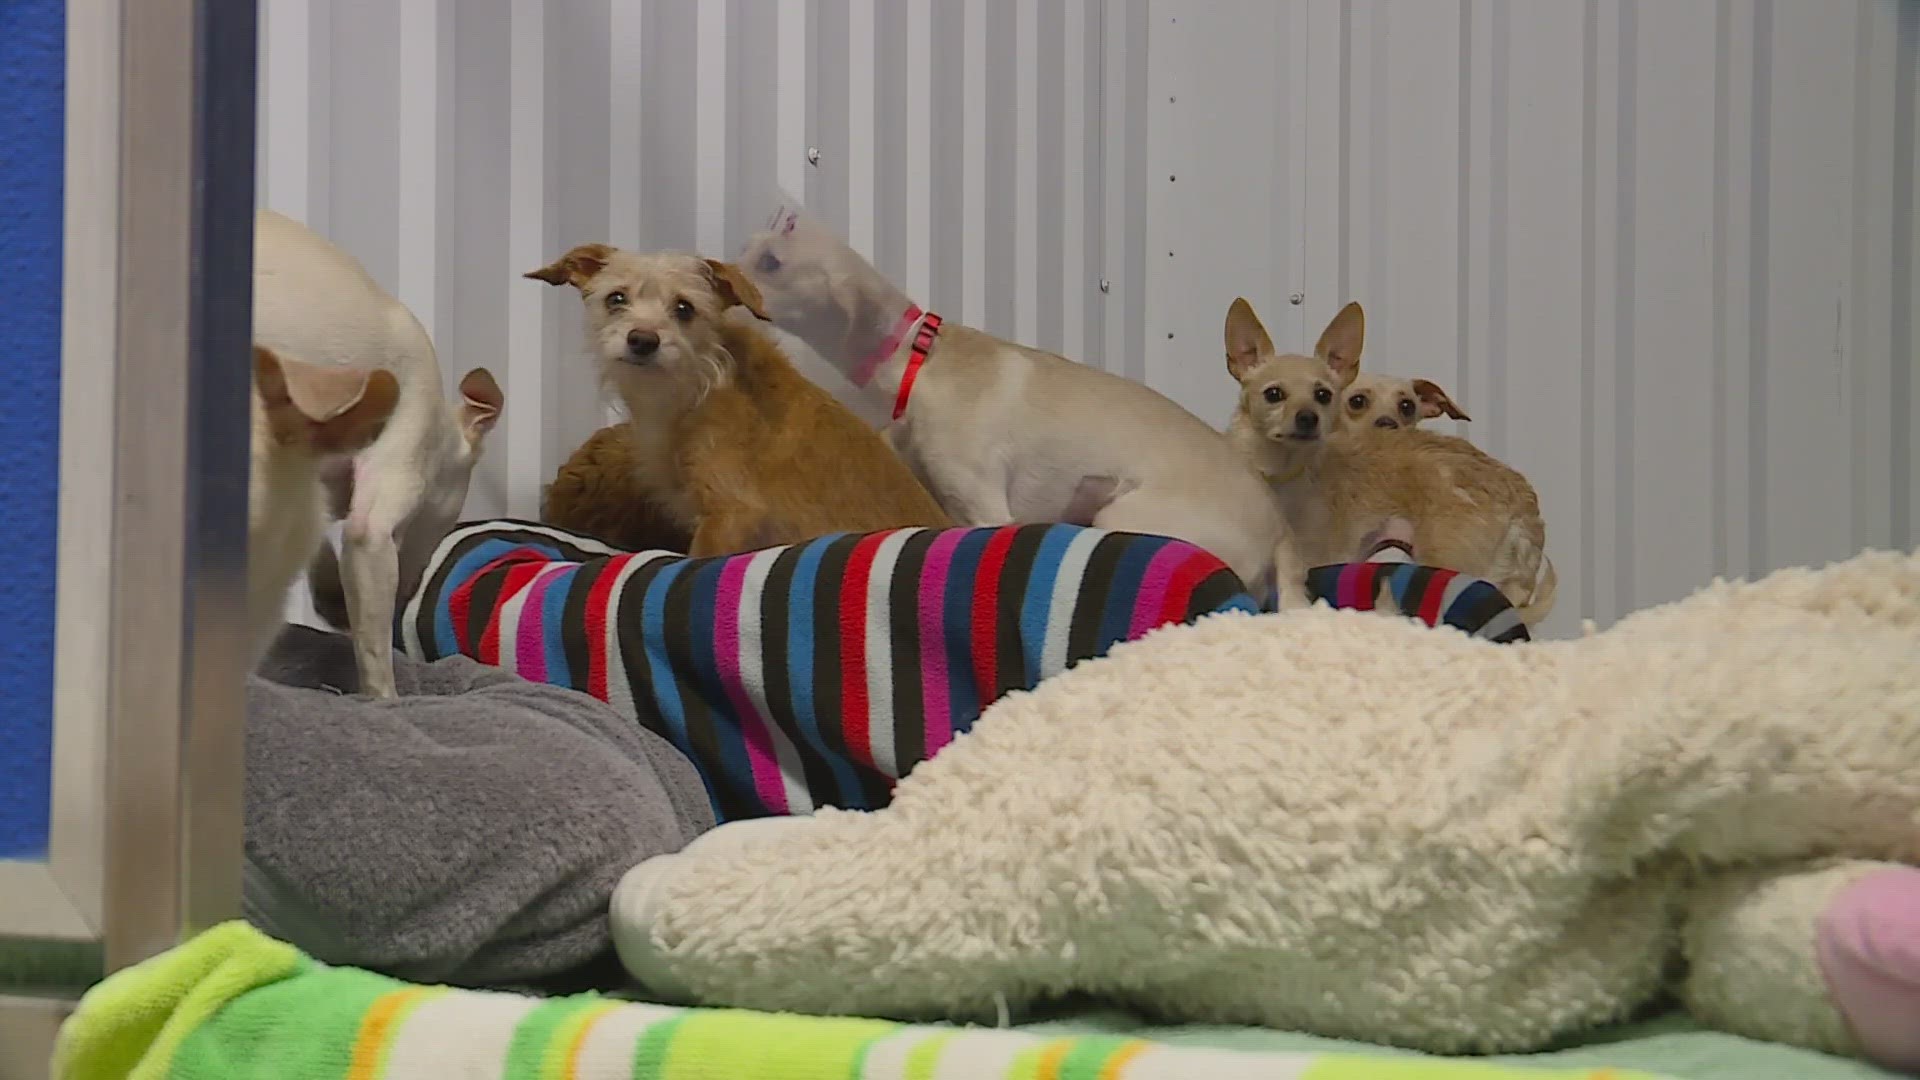 MaxFund leaned on volunteers and staff to provide the dogs with temporary housing until they were ready for adoption.